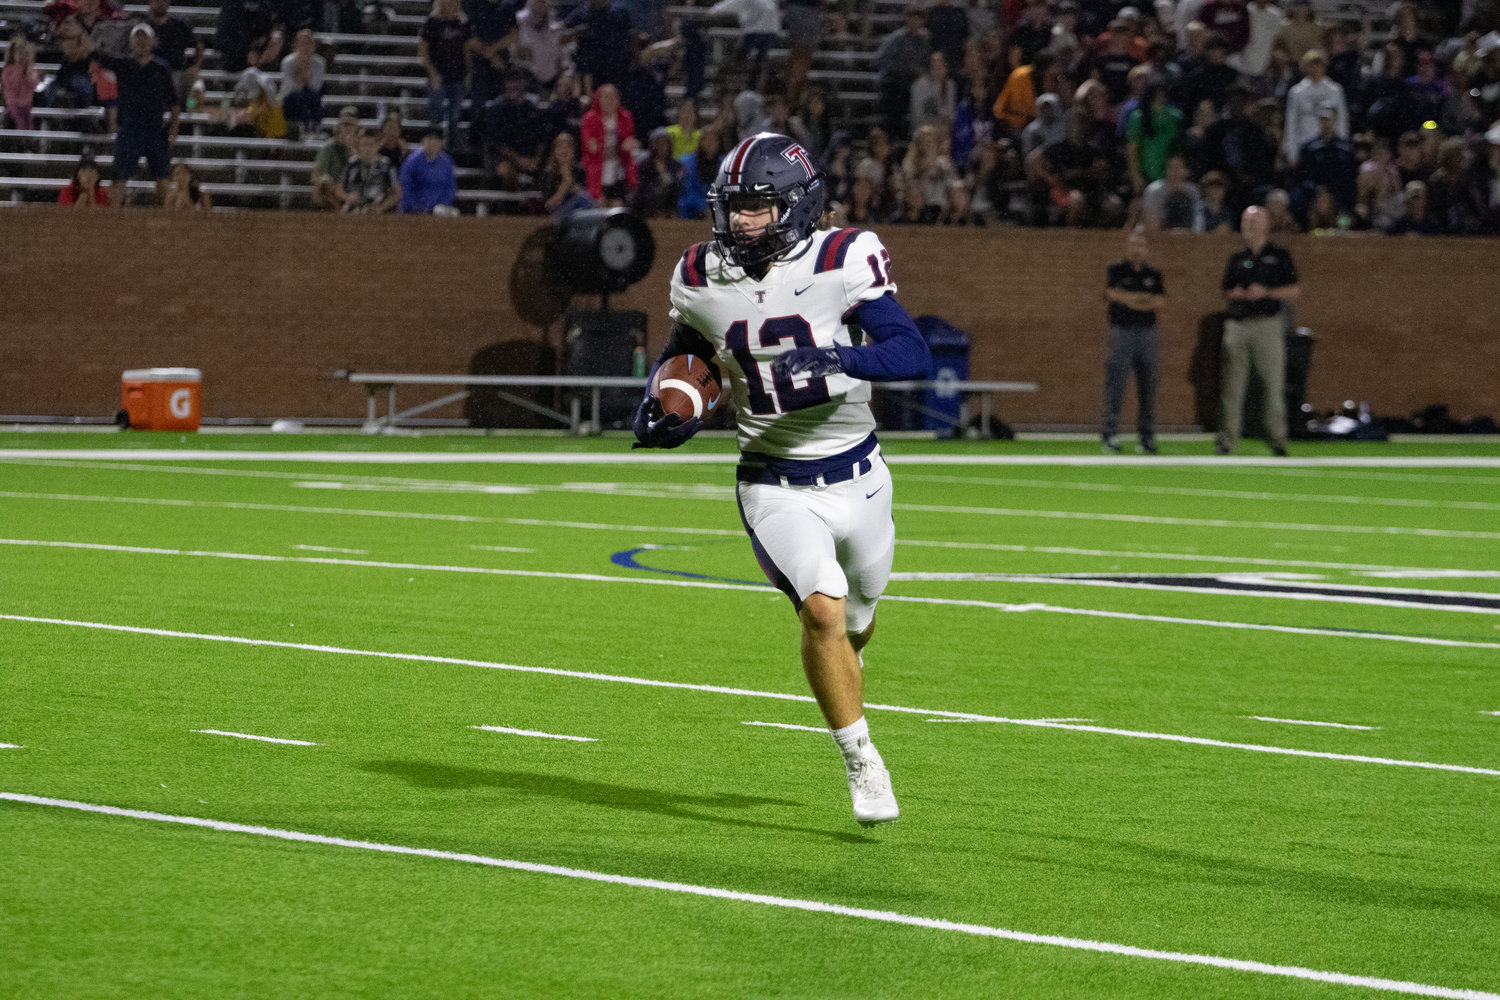 Tompkins' Braden Foor returns an  interception during Friday's game between Tompkins and Paetow at Rhodes Stadium.